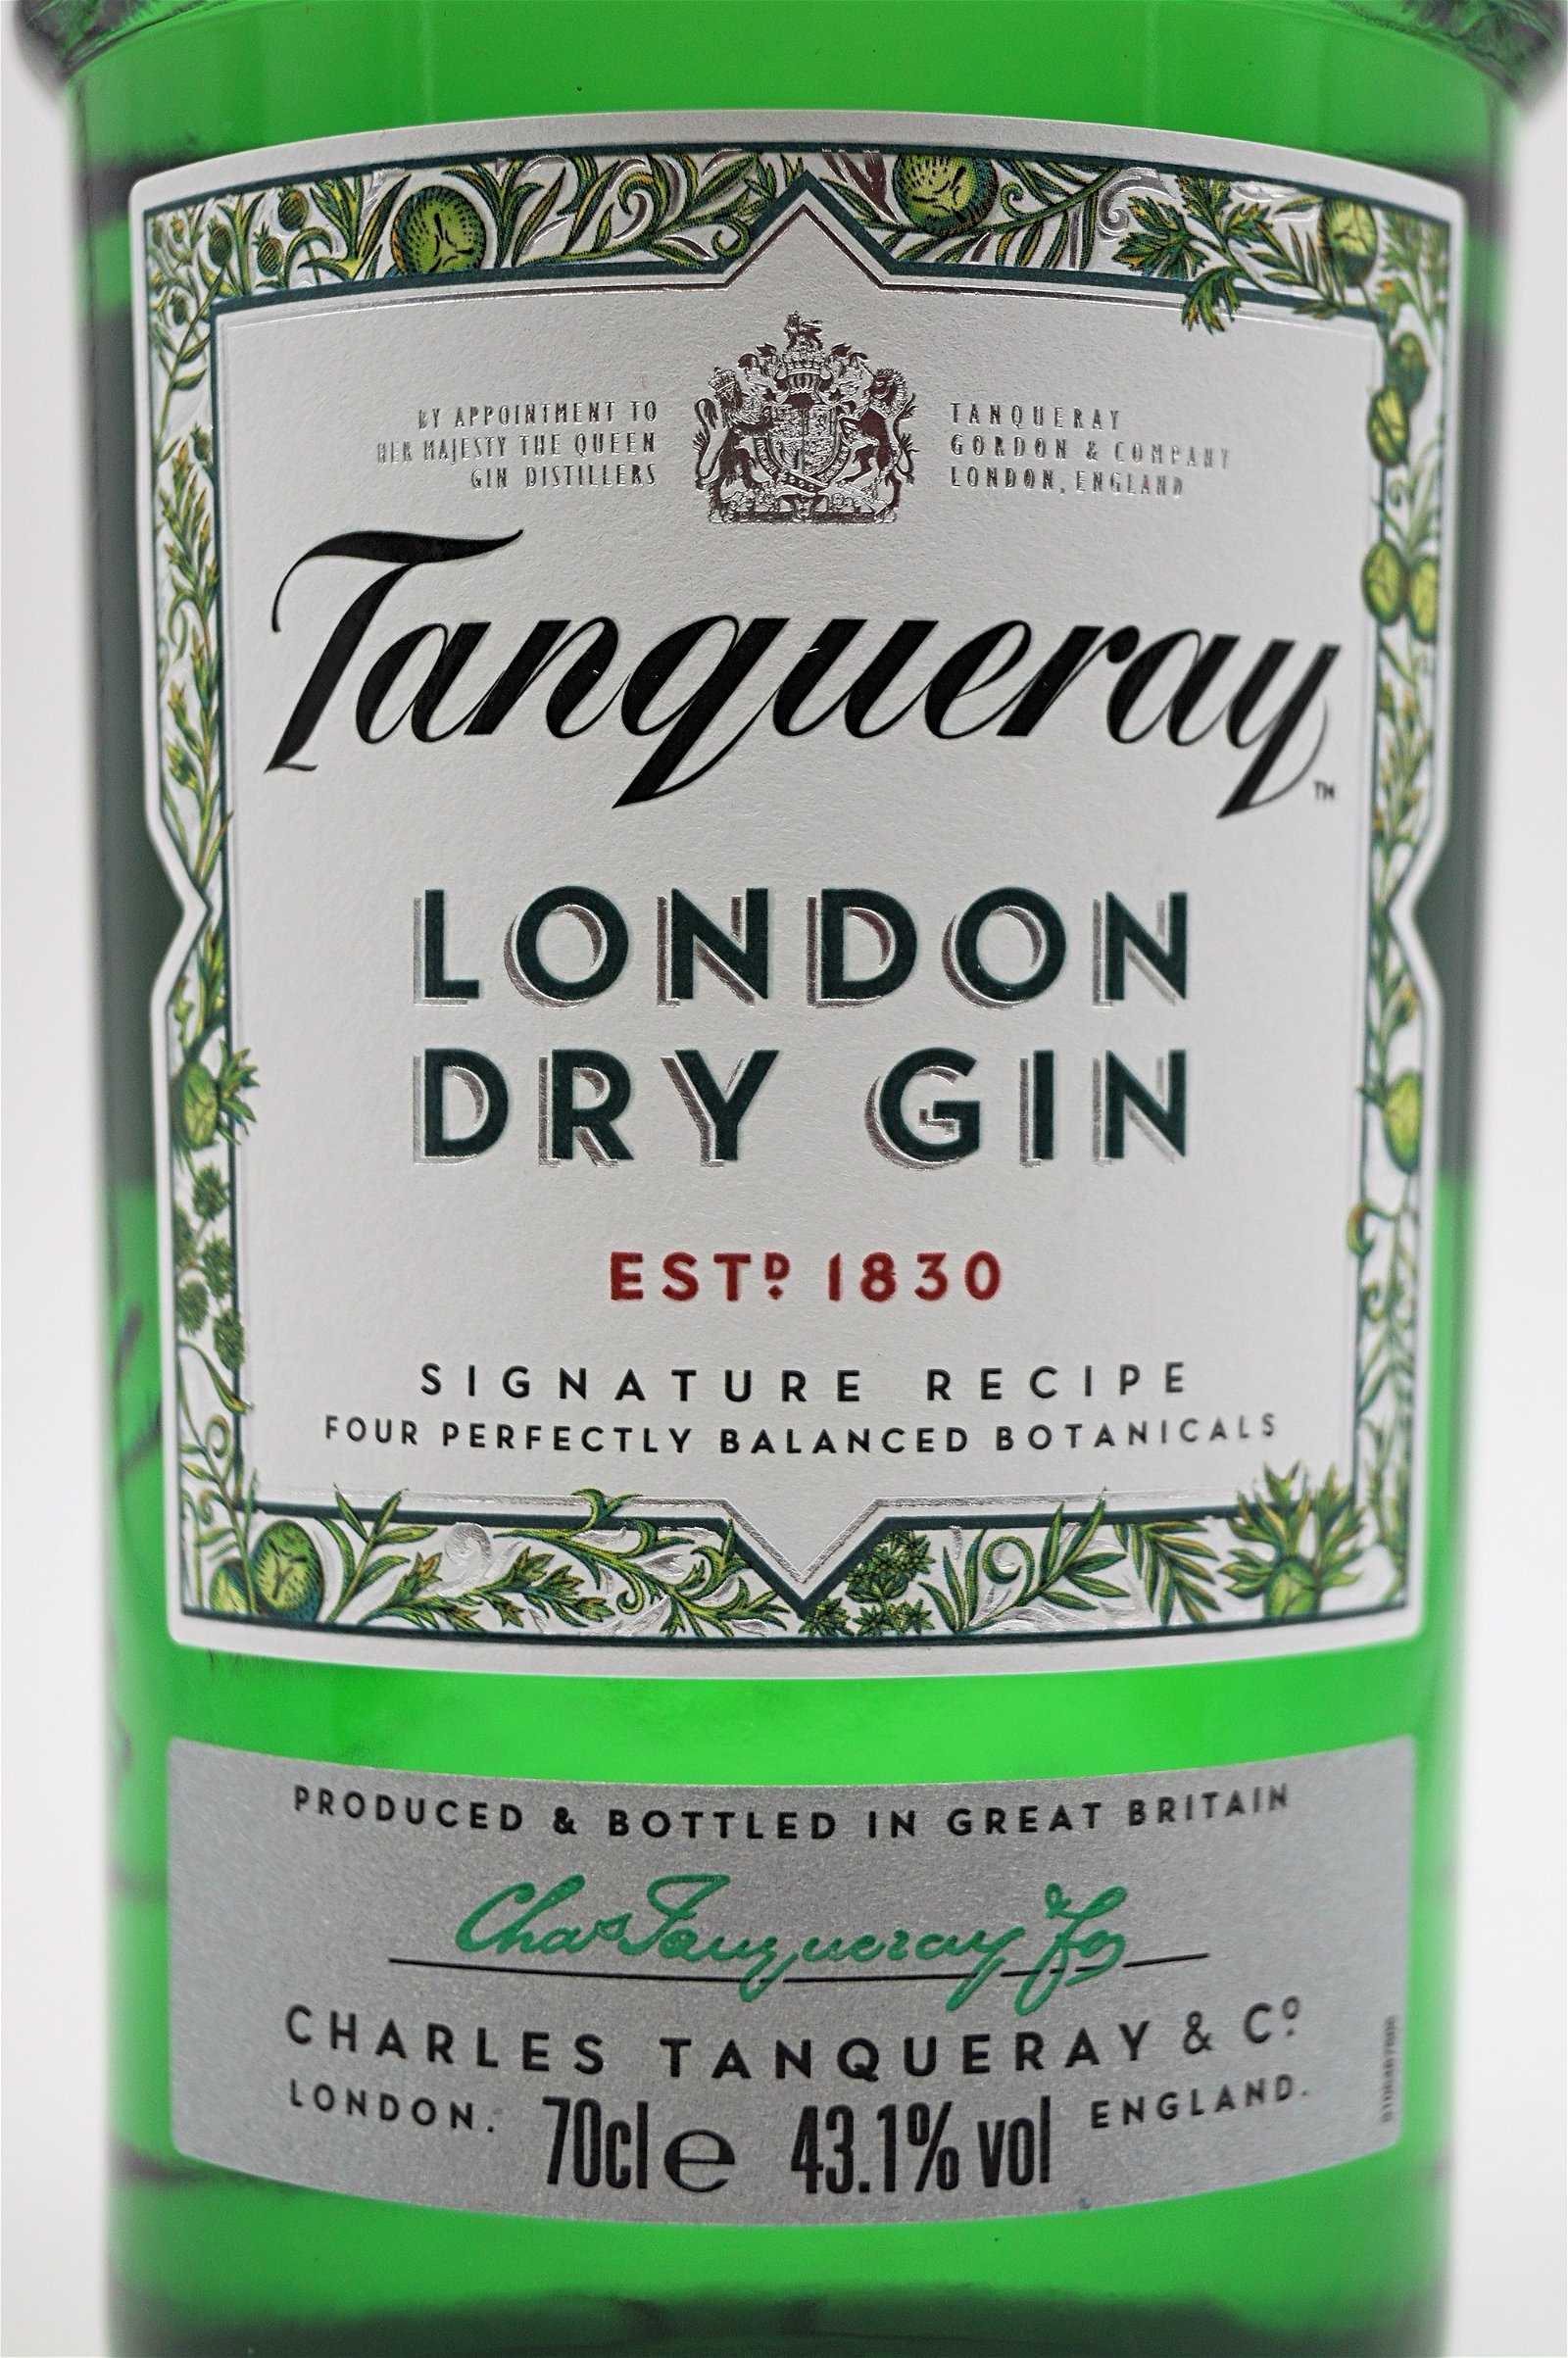 Tanqueray Imported London Dry Gin